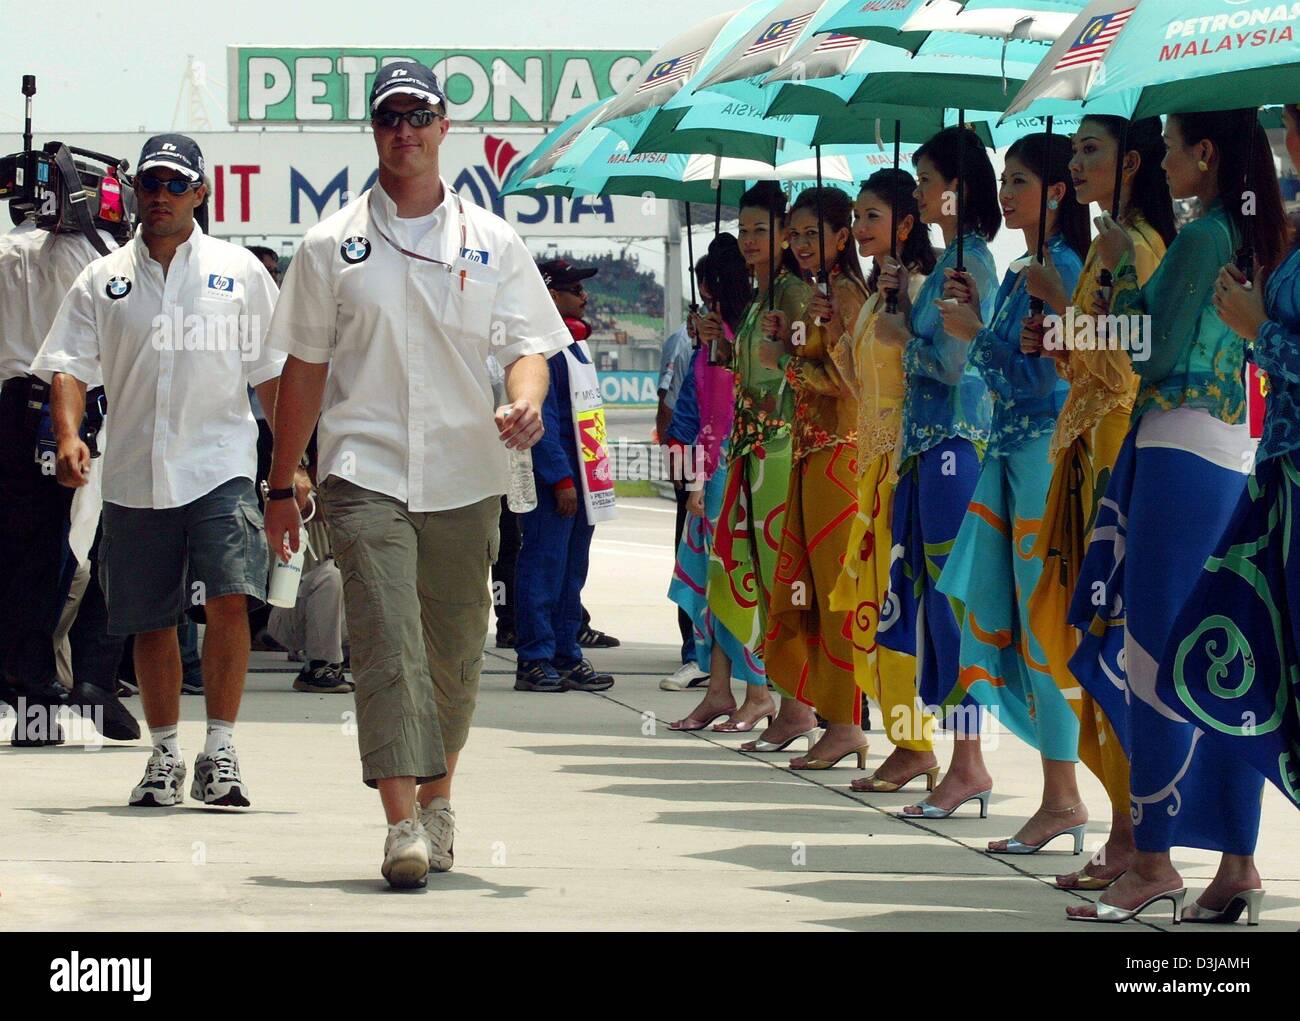 (dpa) Malaysian grid girls with umbrellas and traditional Malay clothes are lined up as German F1 pilot Ralf Schumacher (middle/ BMW-Williams) and Colombian F1 pilot Juan Pablo Montoya (left/ BMW-Williams) walk past them before the start of the Grand Prix of Malaysia at the Sepang racetrack near Kuala Lumpur on Sunday, 21 March 2004. Stock Photo